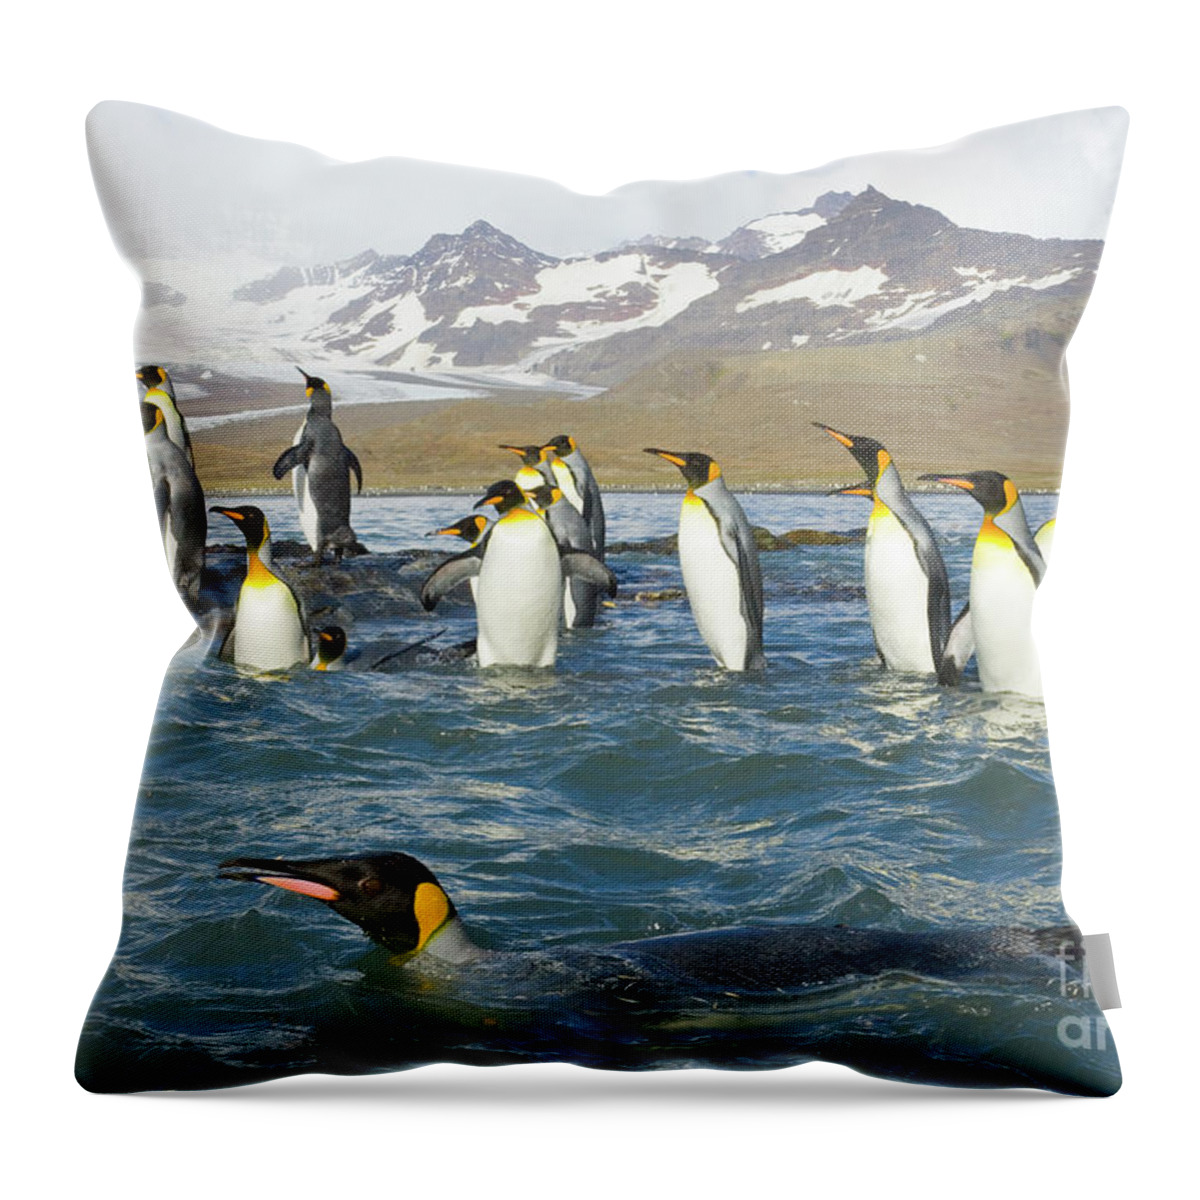 00345351 Throw Pillow featuring the photograph King Penguins Swimming St Andrews Bay by Yva Momatiuk John Eastcott